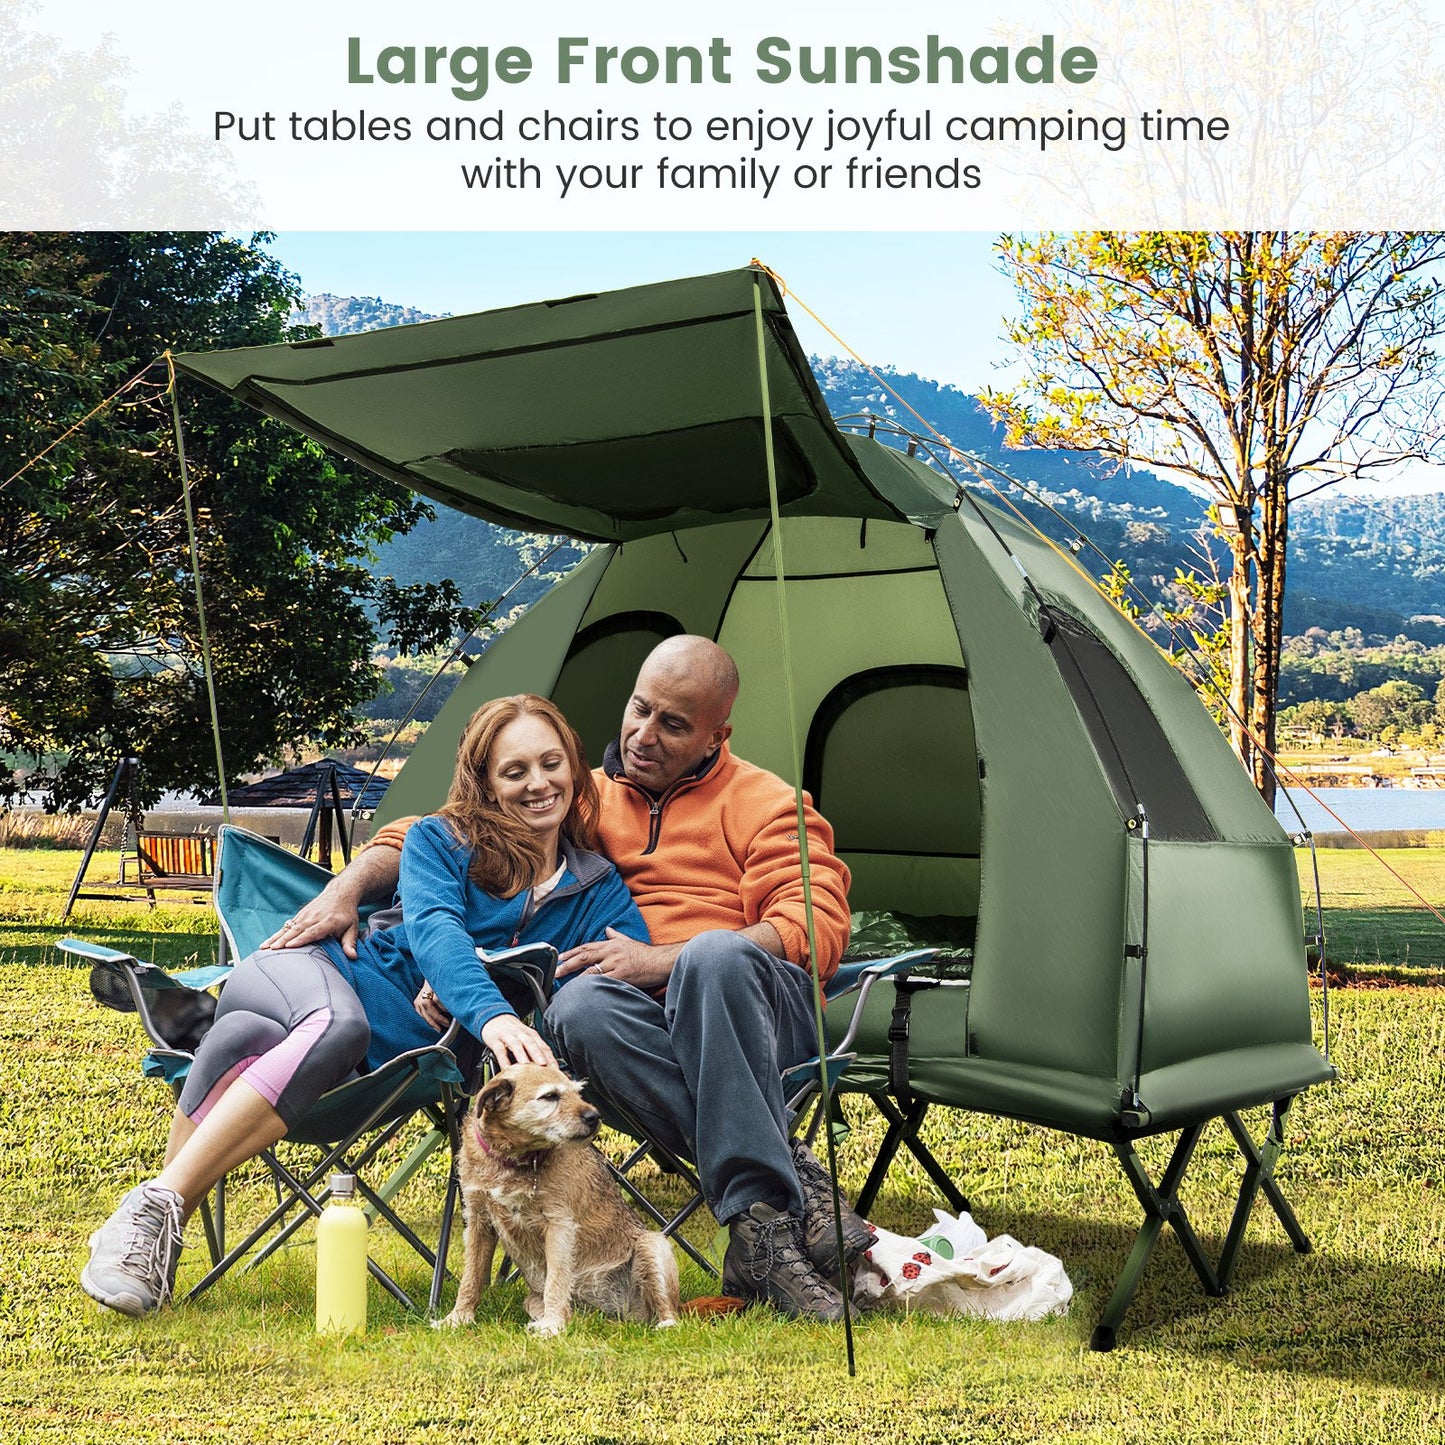 2-Person Foldable Outdoor Camping Tent Cot with Air Mattress and Sleeping Bag, Green